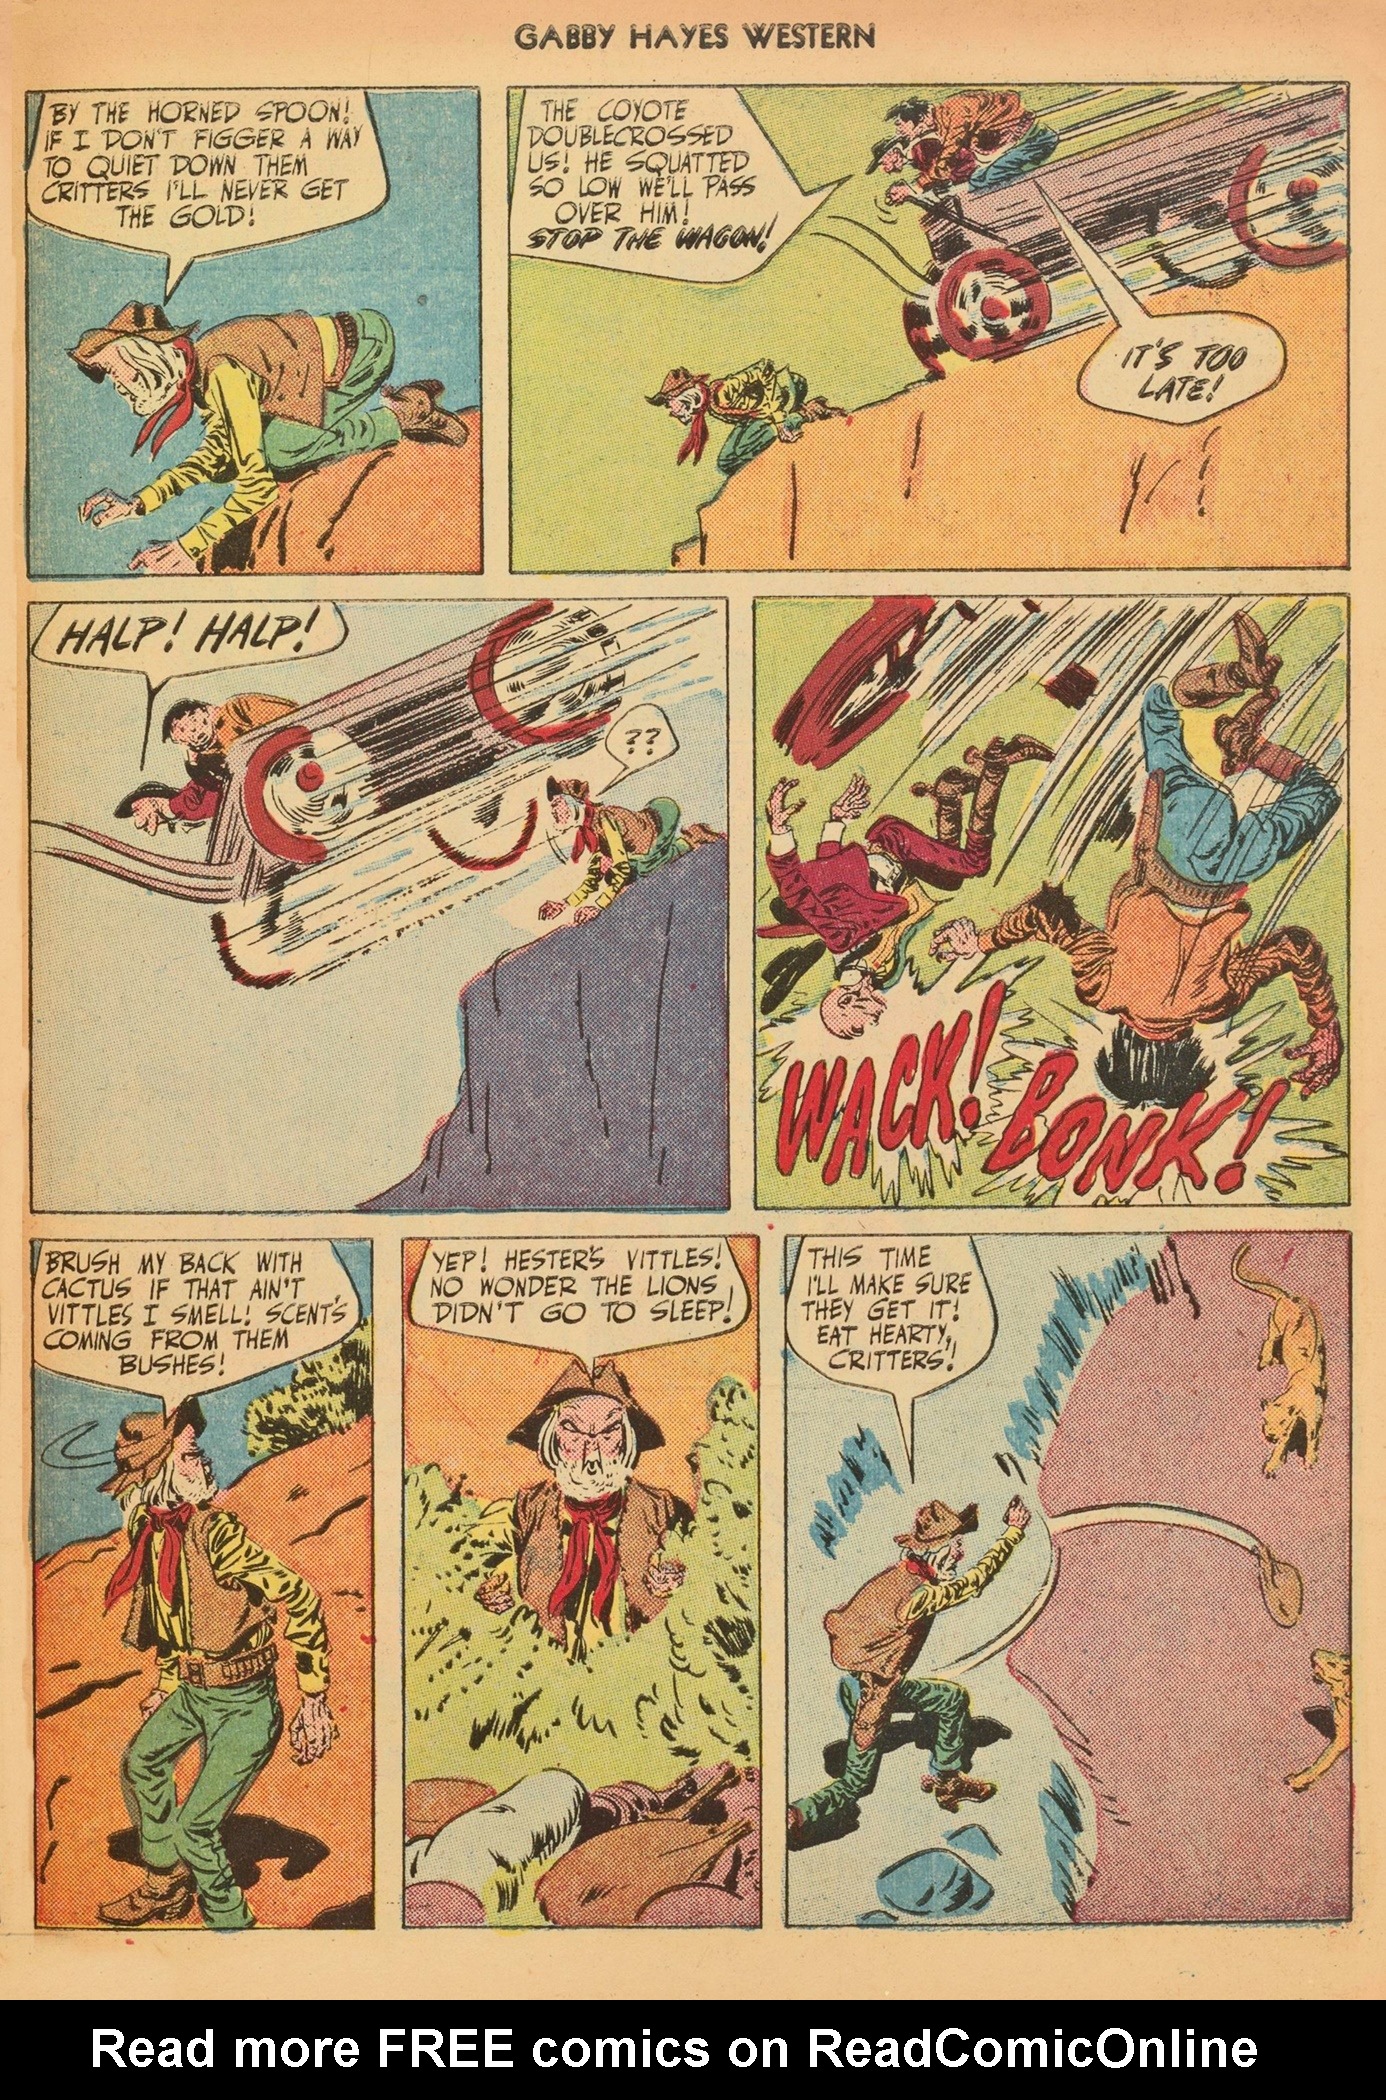 Read online Gabby Hayes Western comic -  Issue #27 - 31